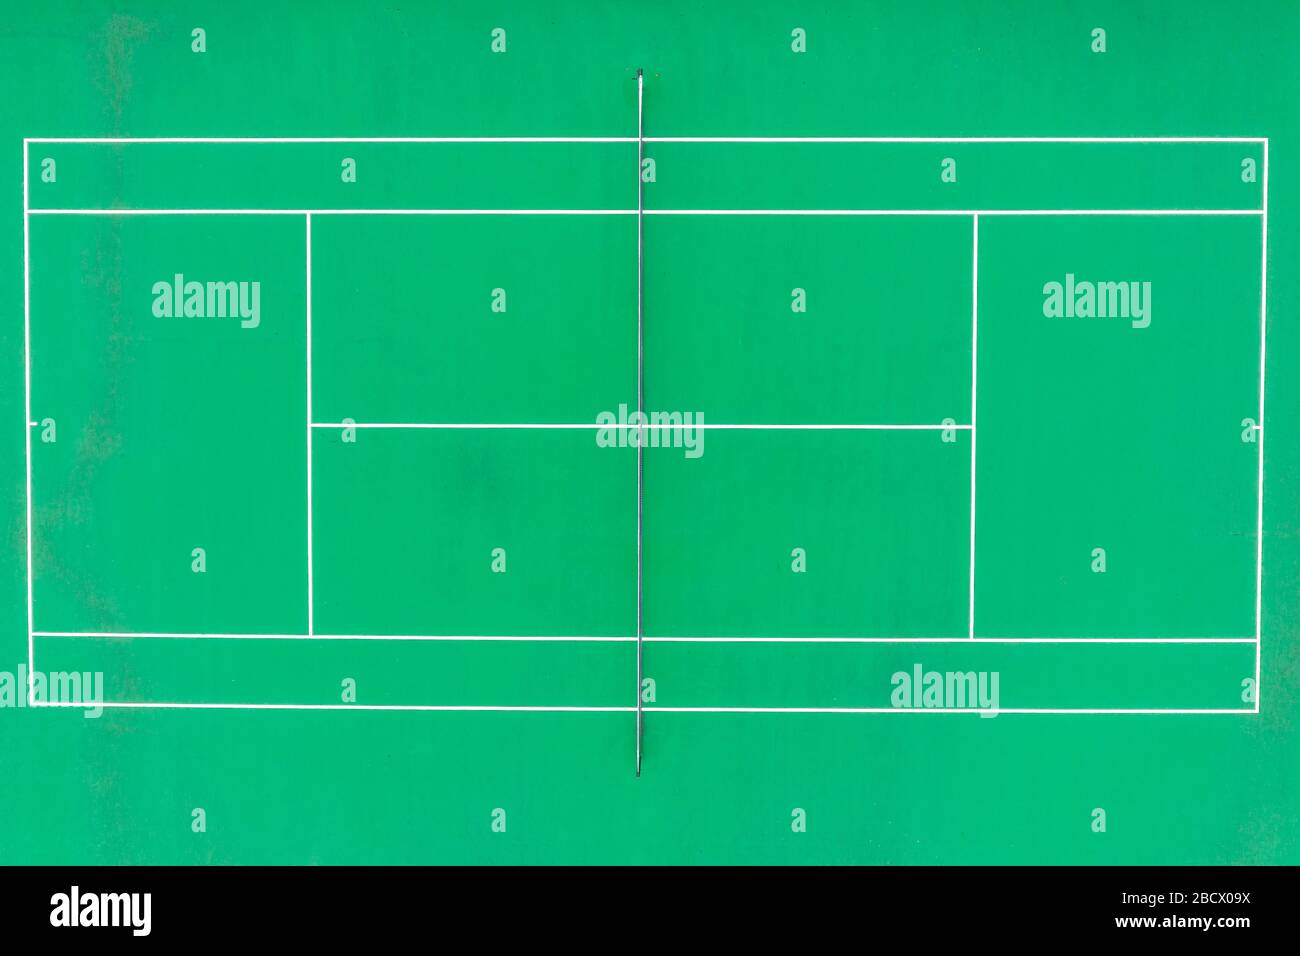 Aerial top down view of tennis court with  green synthetic surface, baseline, singles' sideline, doubles' sideline, net, net posts, center mark, se Stock Photo